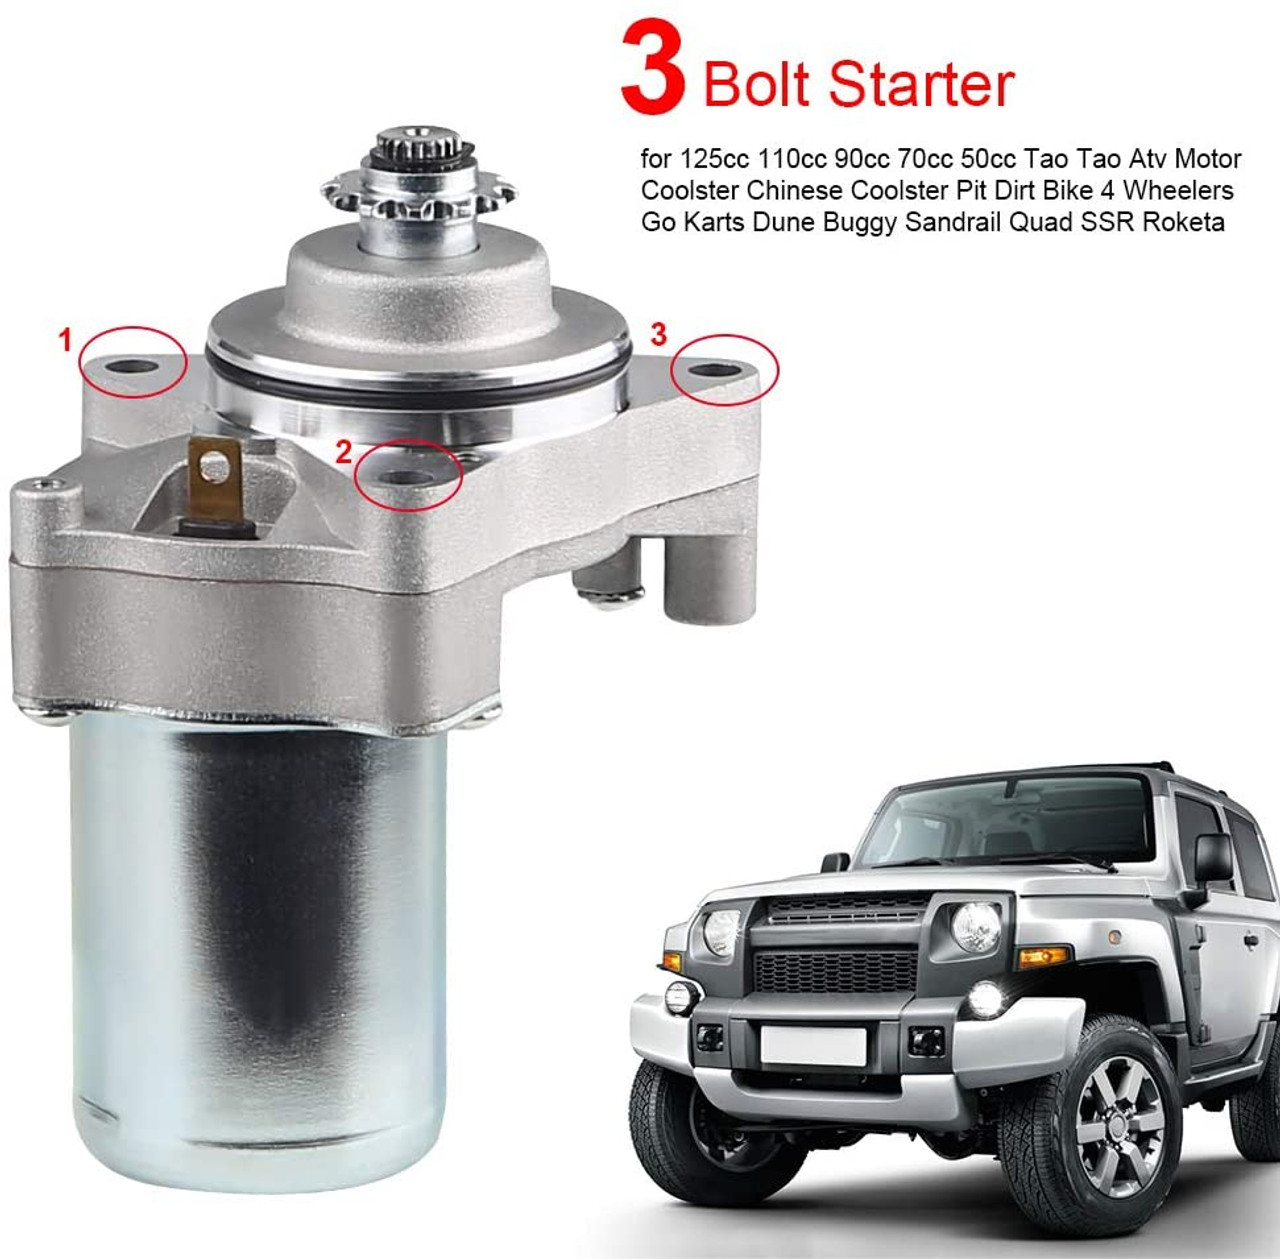 Buy The Electric Starter Motor Under for Horizontal Engine, for sale.